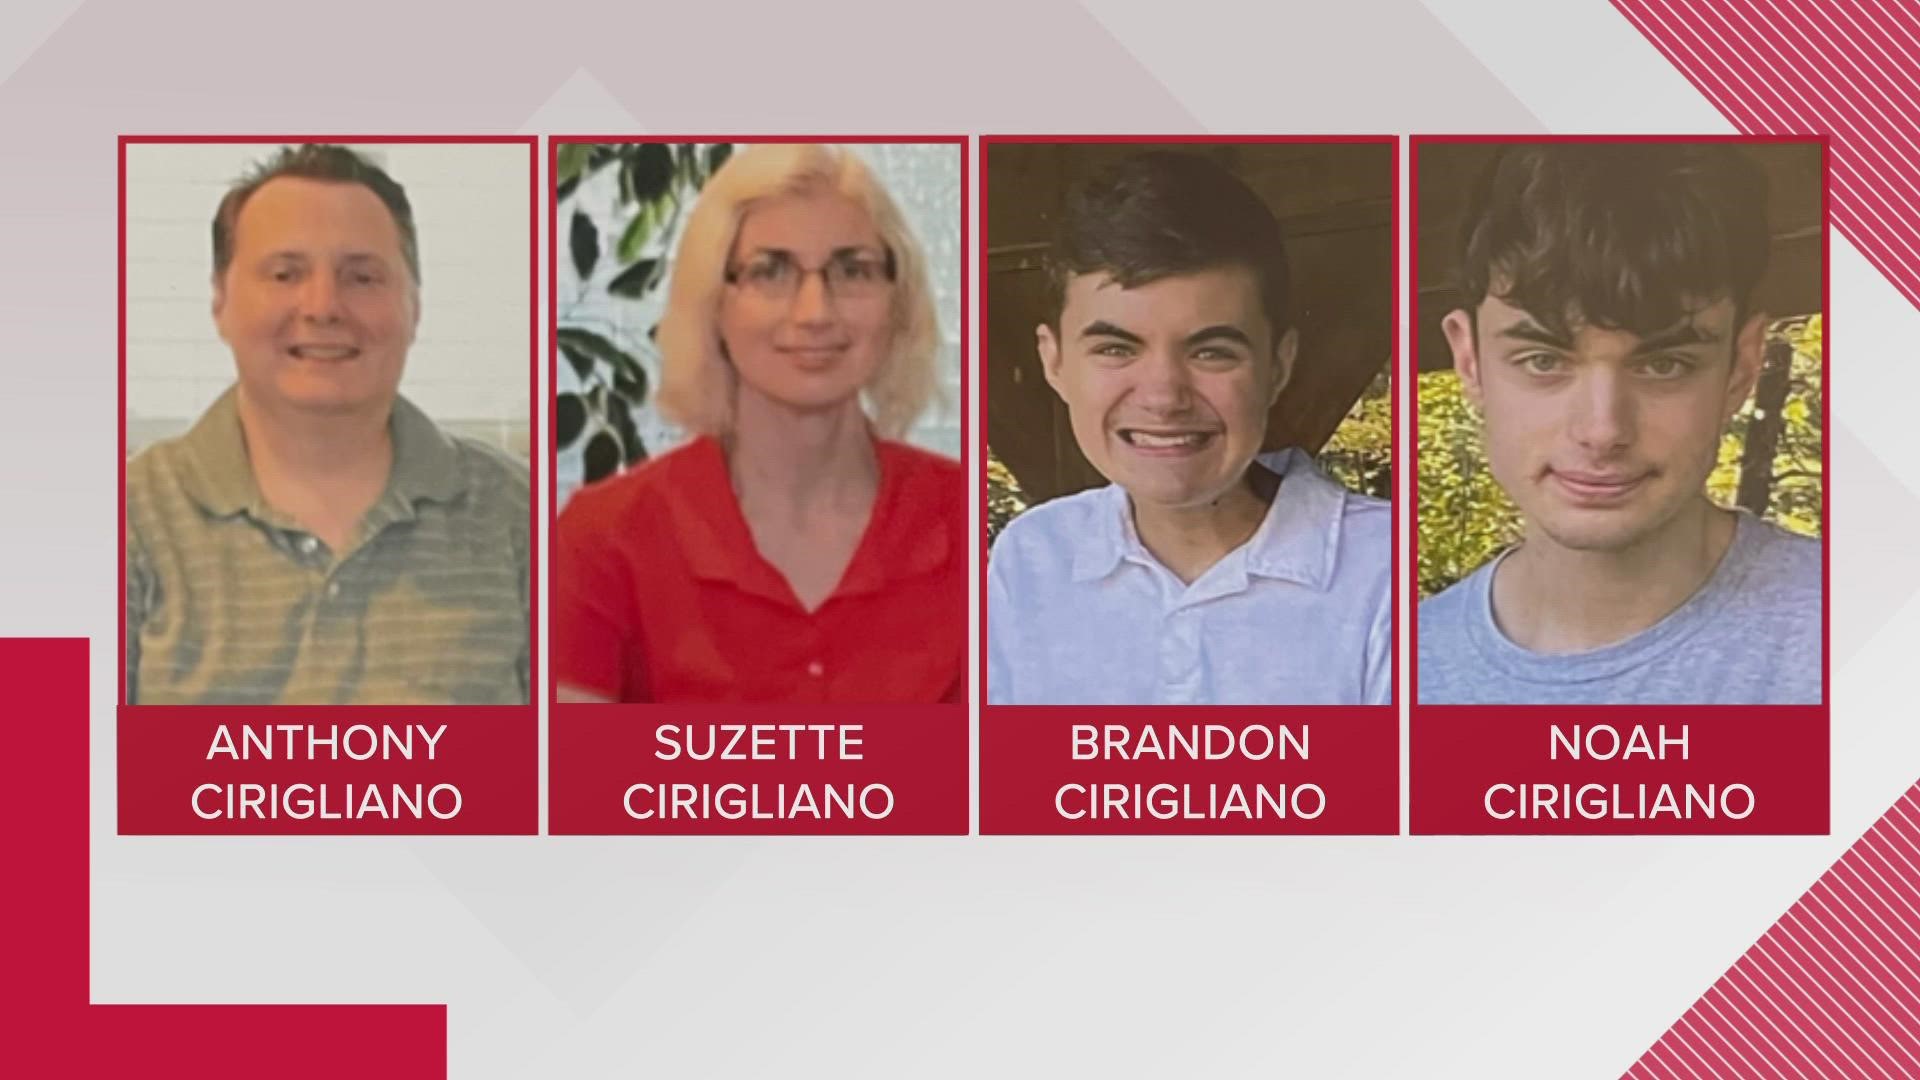 Police say Anthony, Suzette, Noah and Brandon Cirigliano were last heard from on Sunday. If you know of their whereabouts, contact police at 231-924-2400 or 911.